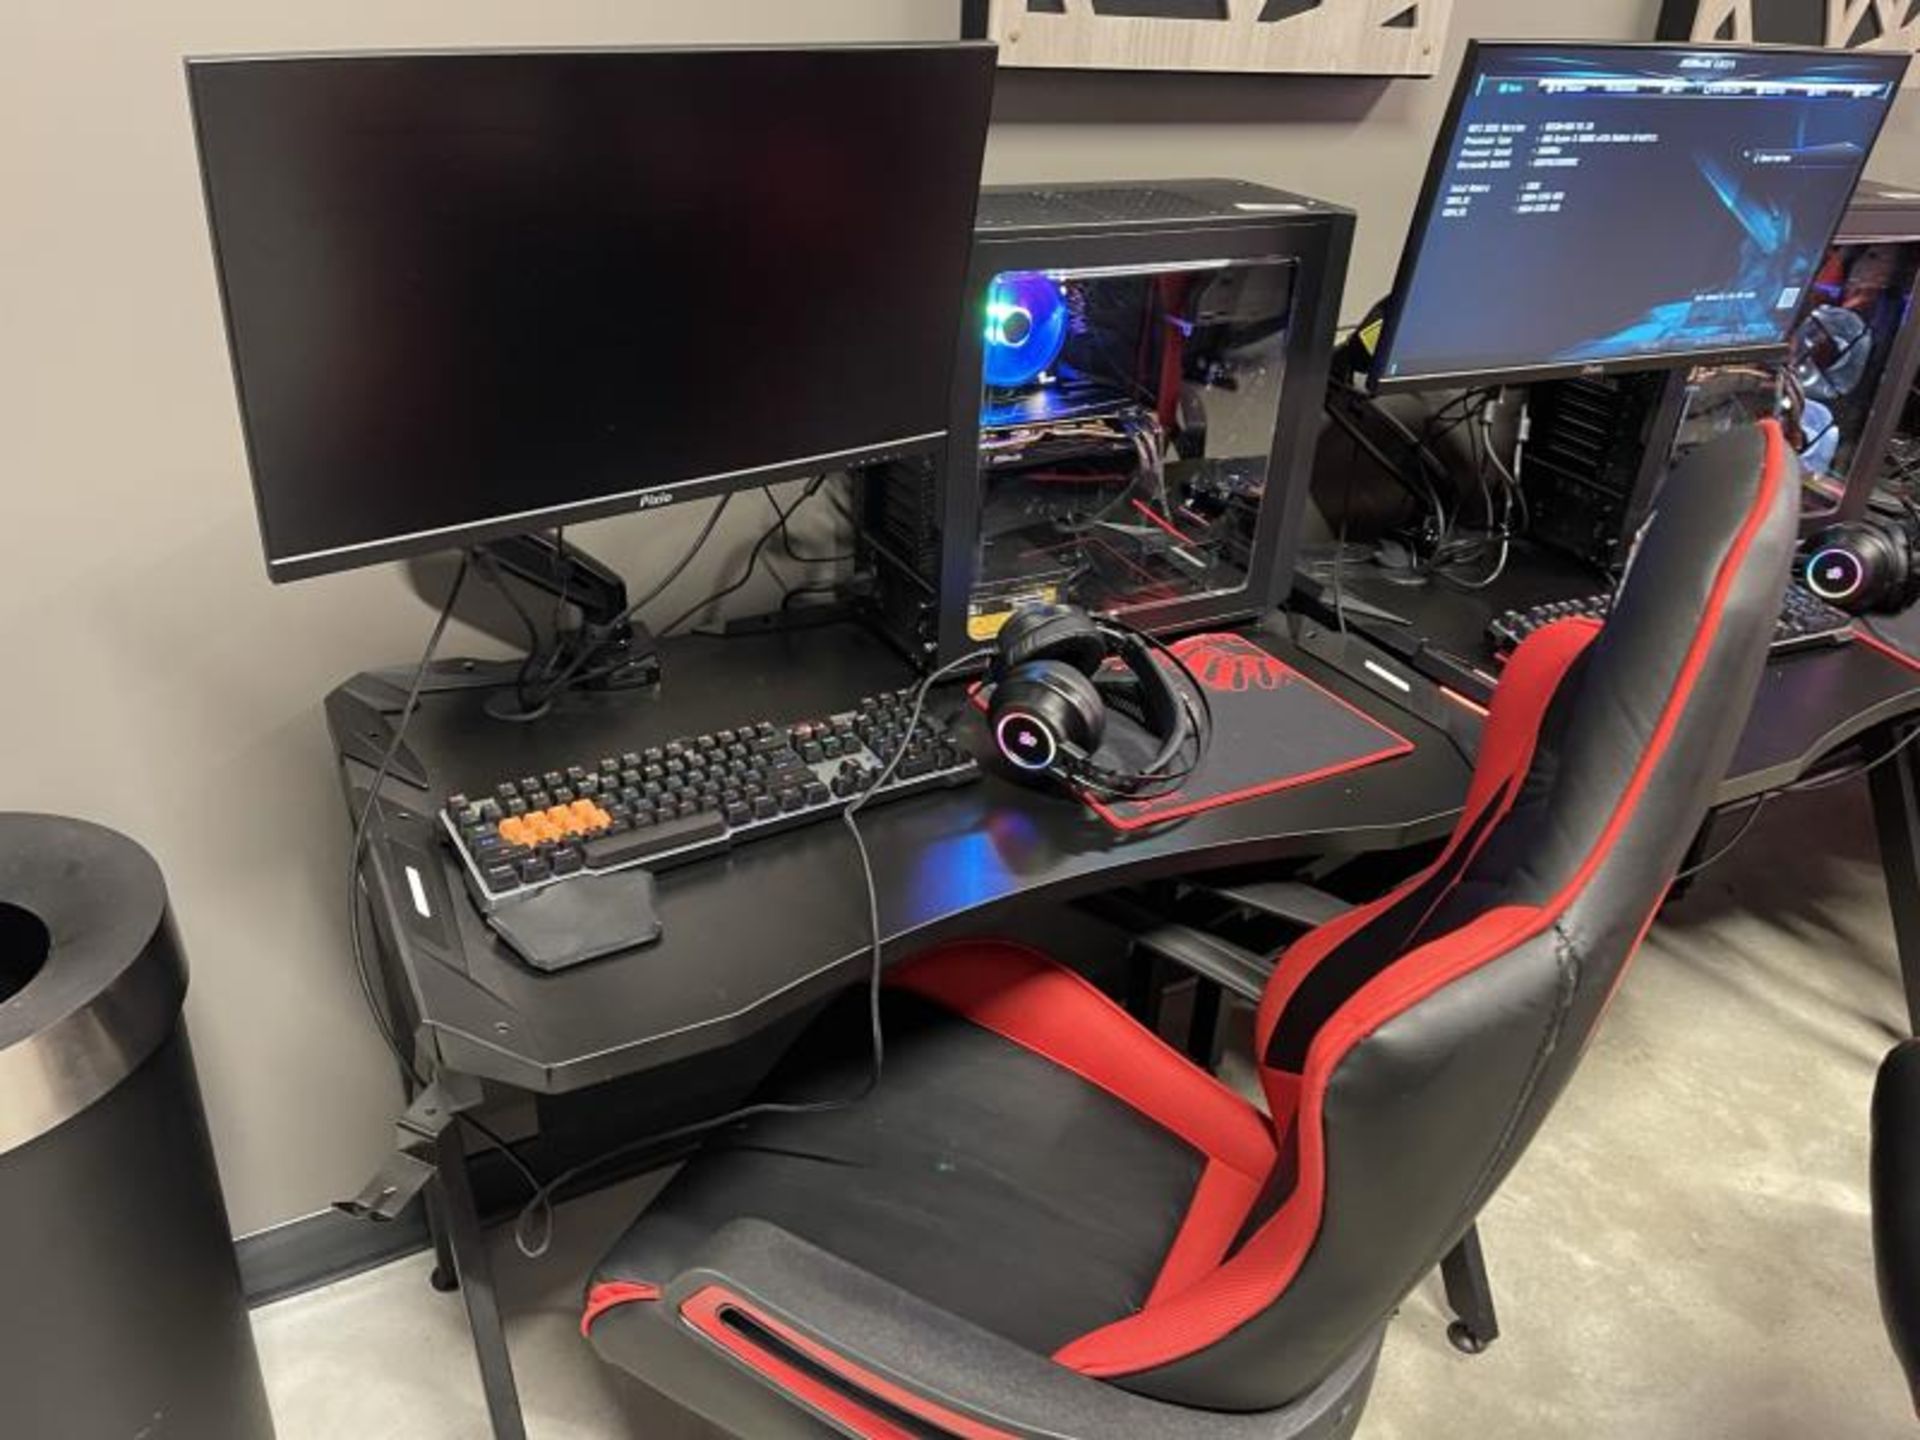 Gaming PC w/ DESK & CHAIR Included : Fratel Design Case, Processor: ASRock Challenger Series / Radeo